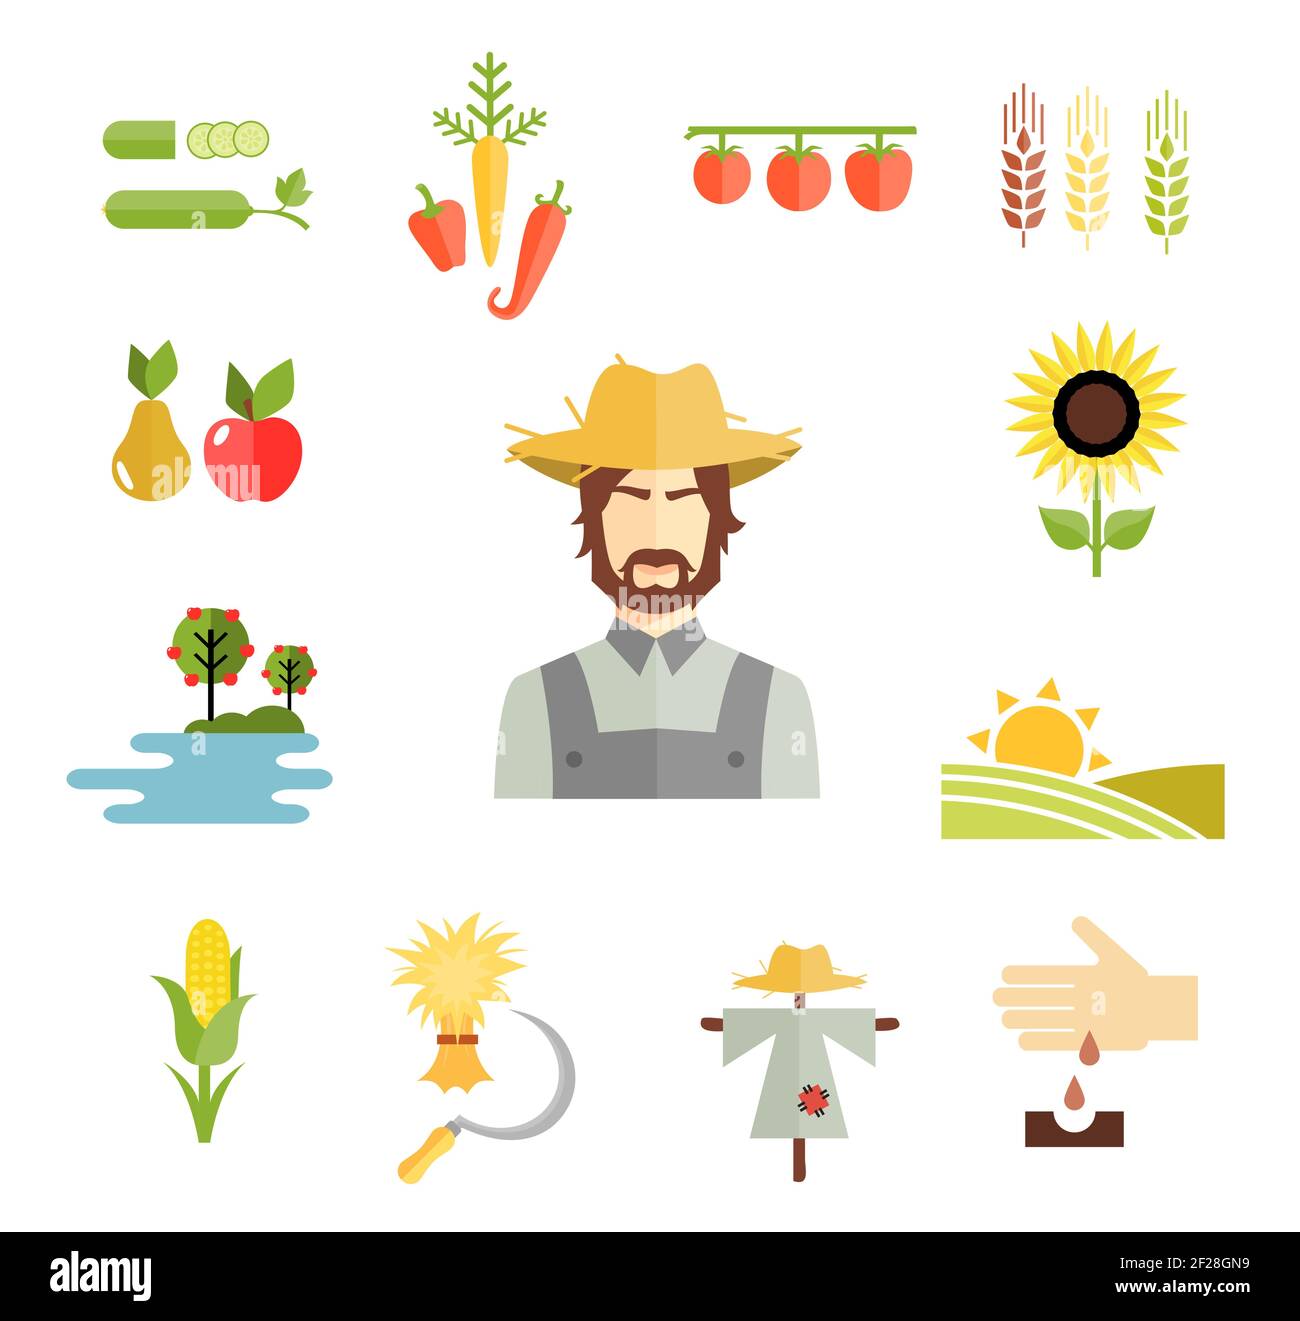 Set of colorful vector farm icons for cultivating grains  fruit and vegetables with a farmer   peas  carrots peppers  pear  apple  sunflower  orchard Stock Vector